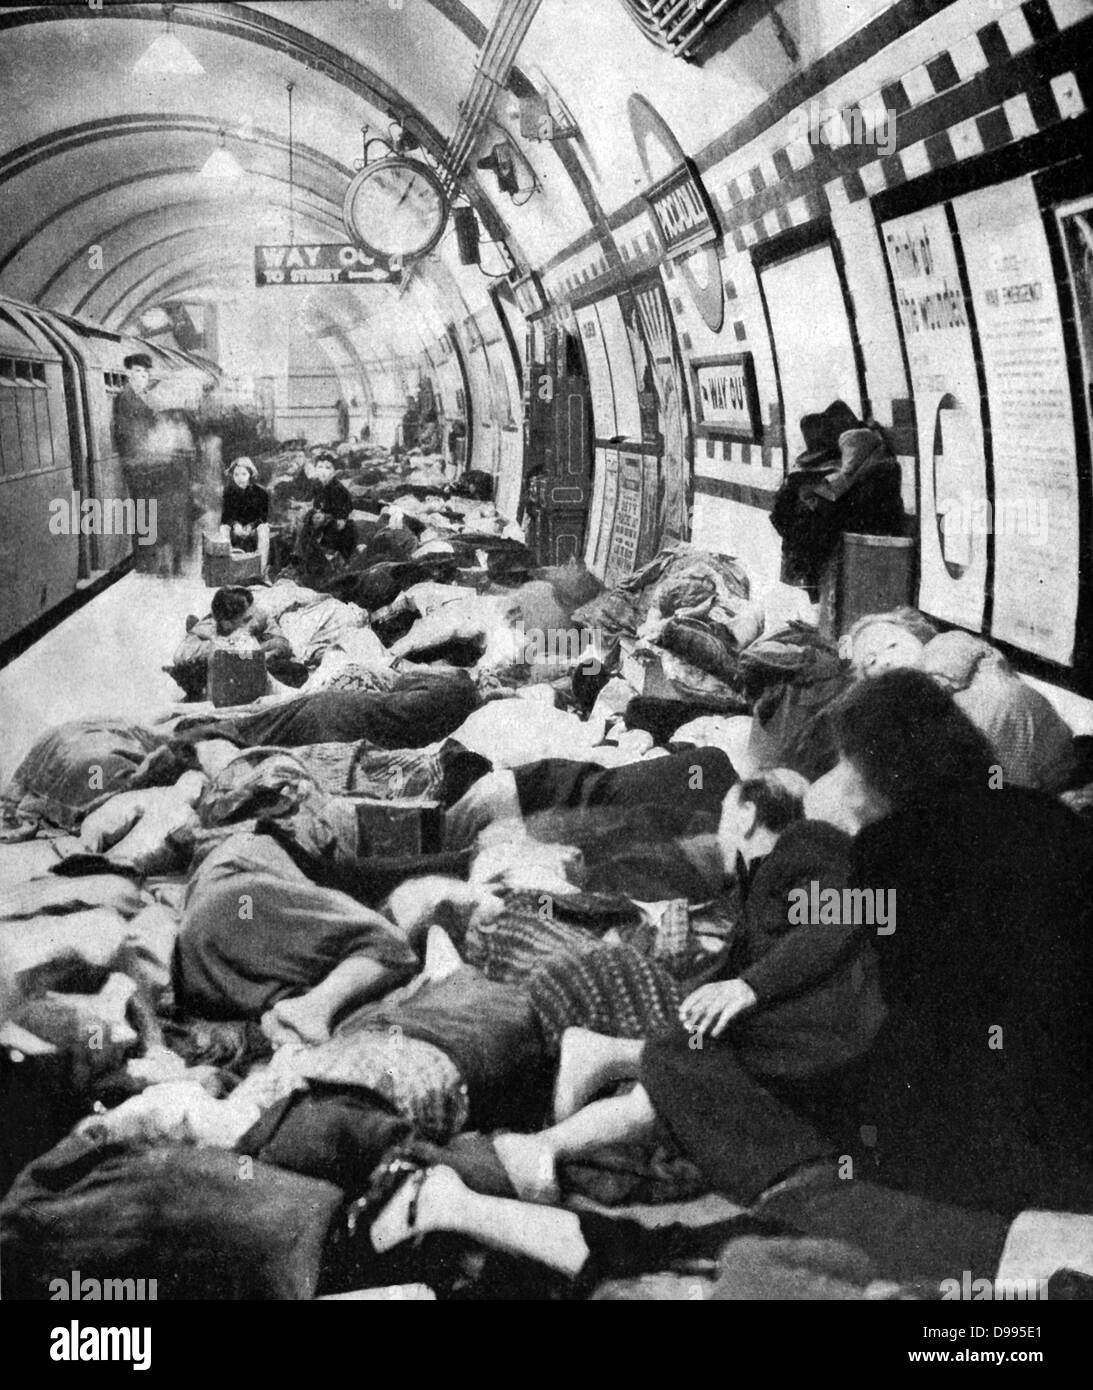 Londoners sheltering on the platform of a station on the Tube (underground railway) during the Blitz. London was bombed on 76 consecutive nights by the Luftwaffe (German Air Force) between July 1940 and May 1941. Stock Photo